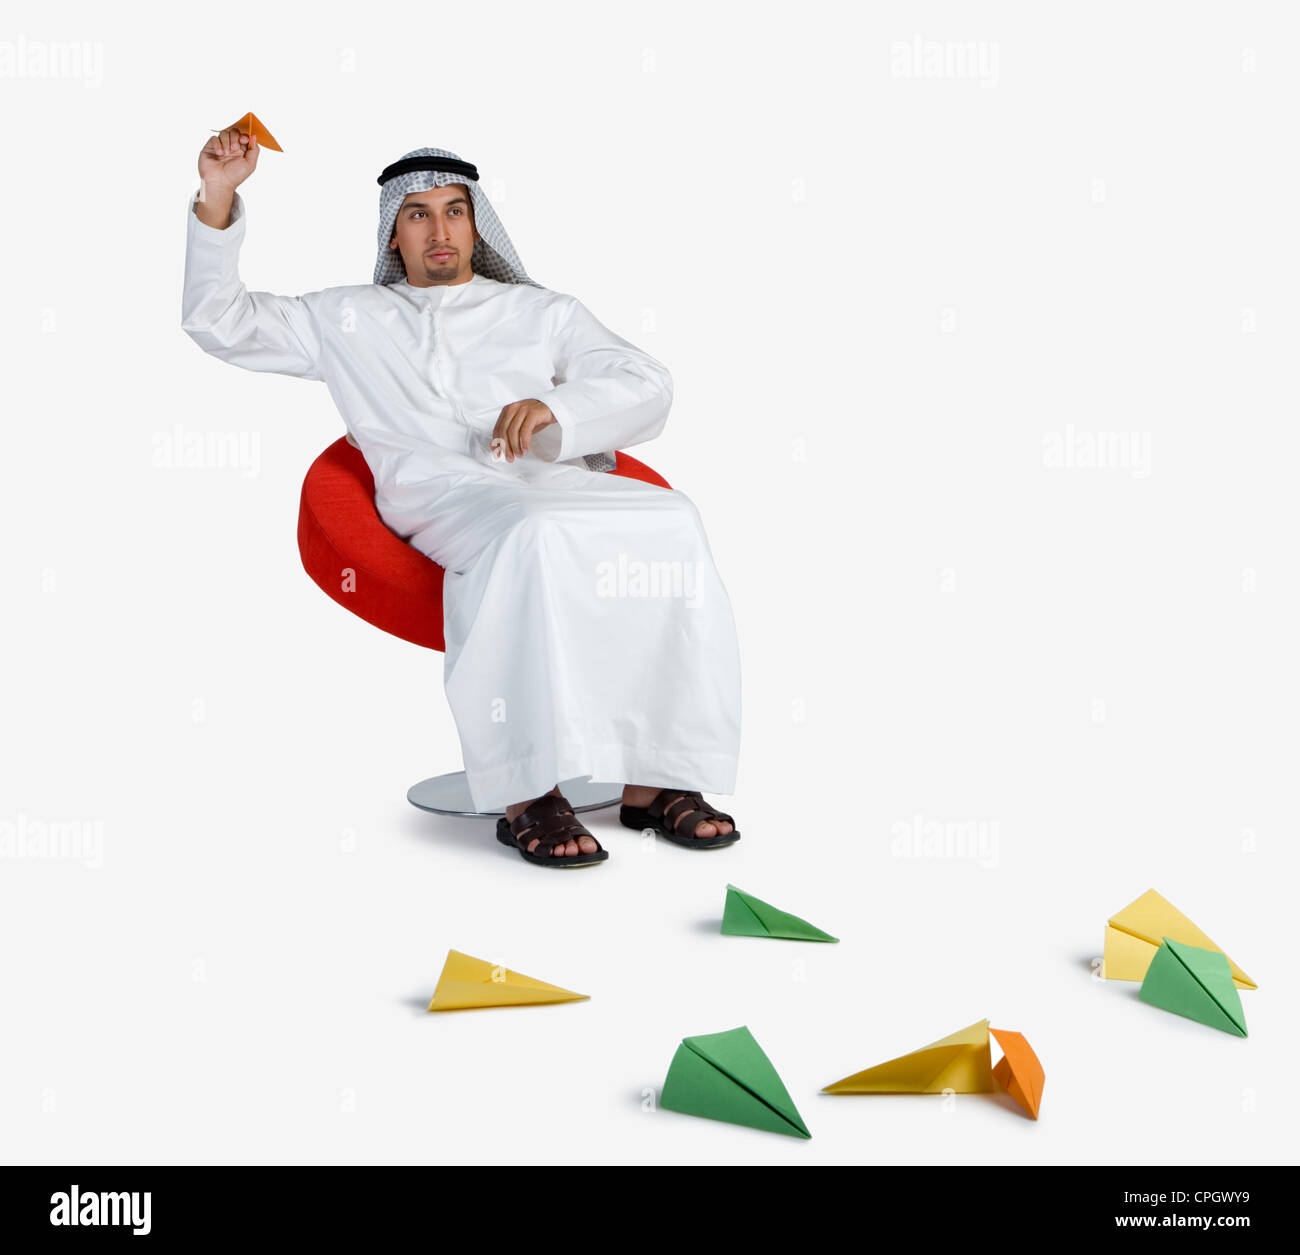 Young man playing with paper planes Stock Photo